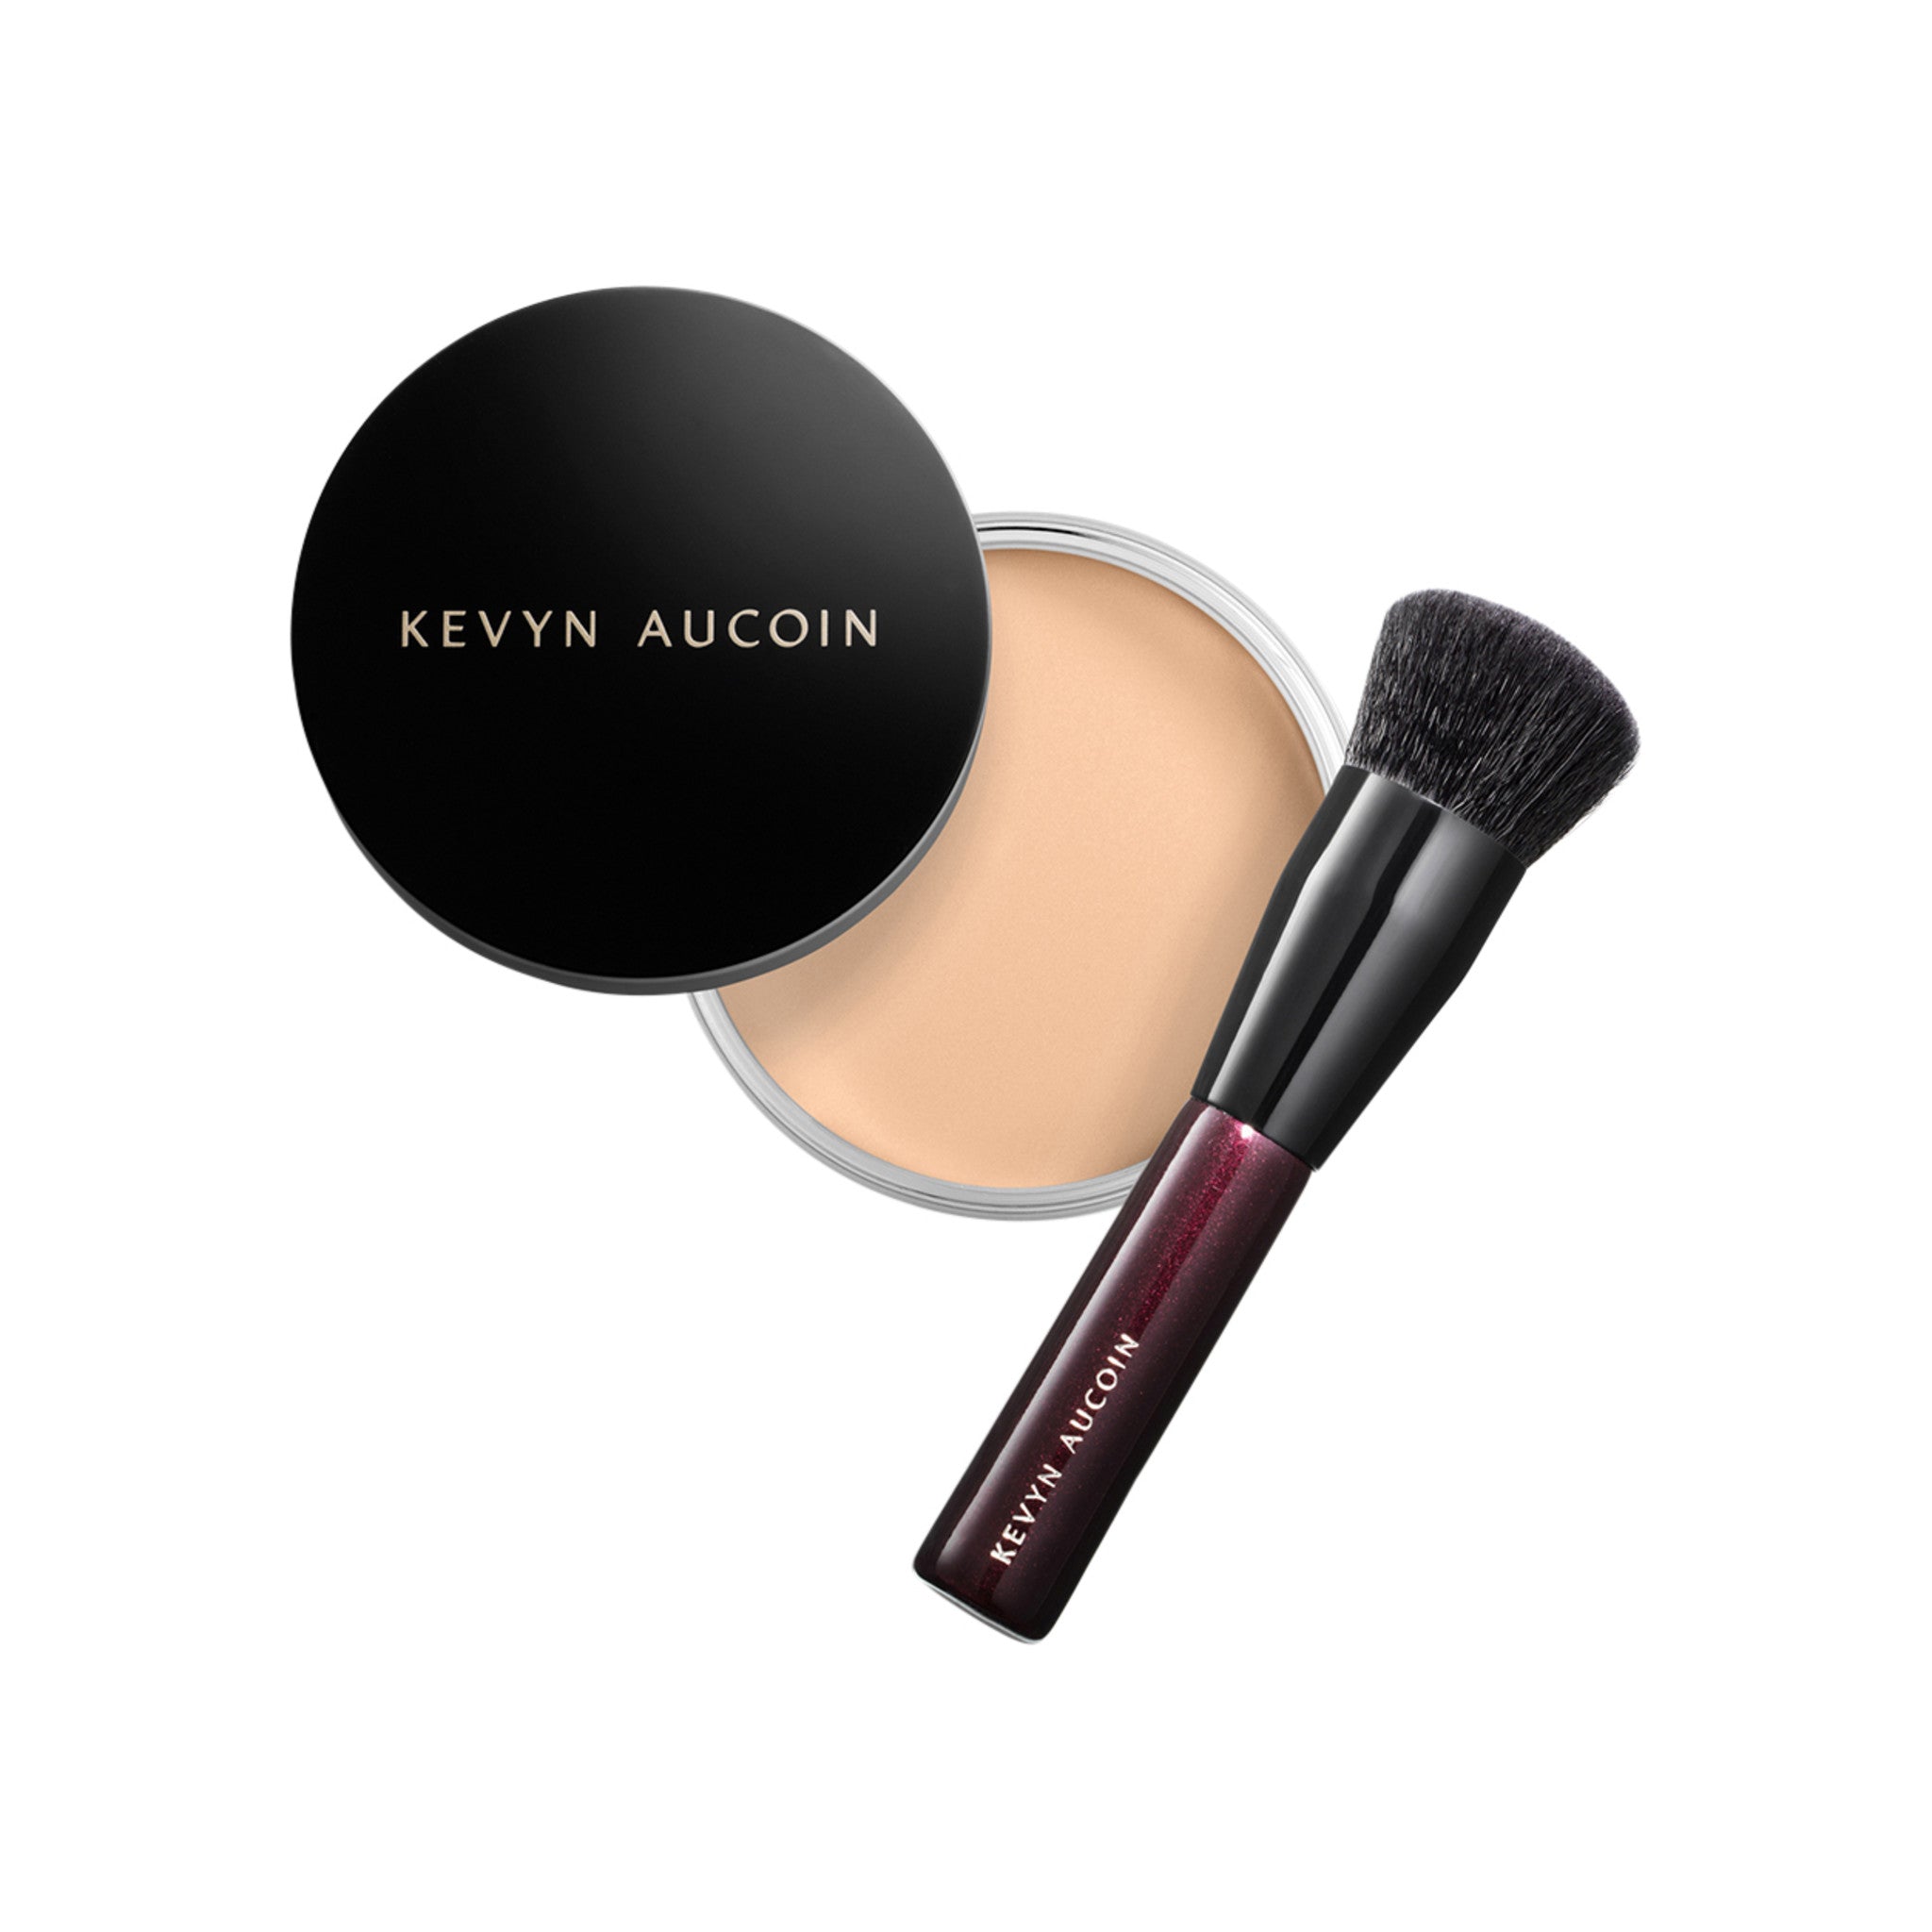 Kevyn Aucoin Foundation Balm Color/Shade variant: Light 01 main image. This product is for light cool pink complexions